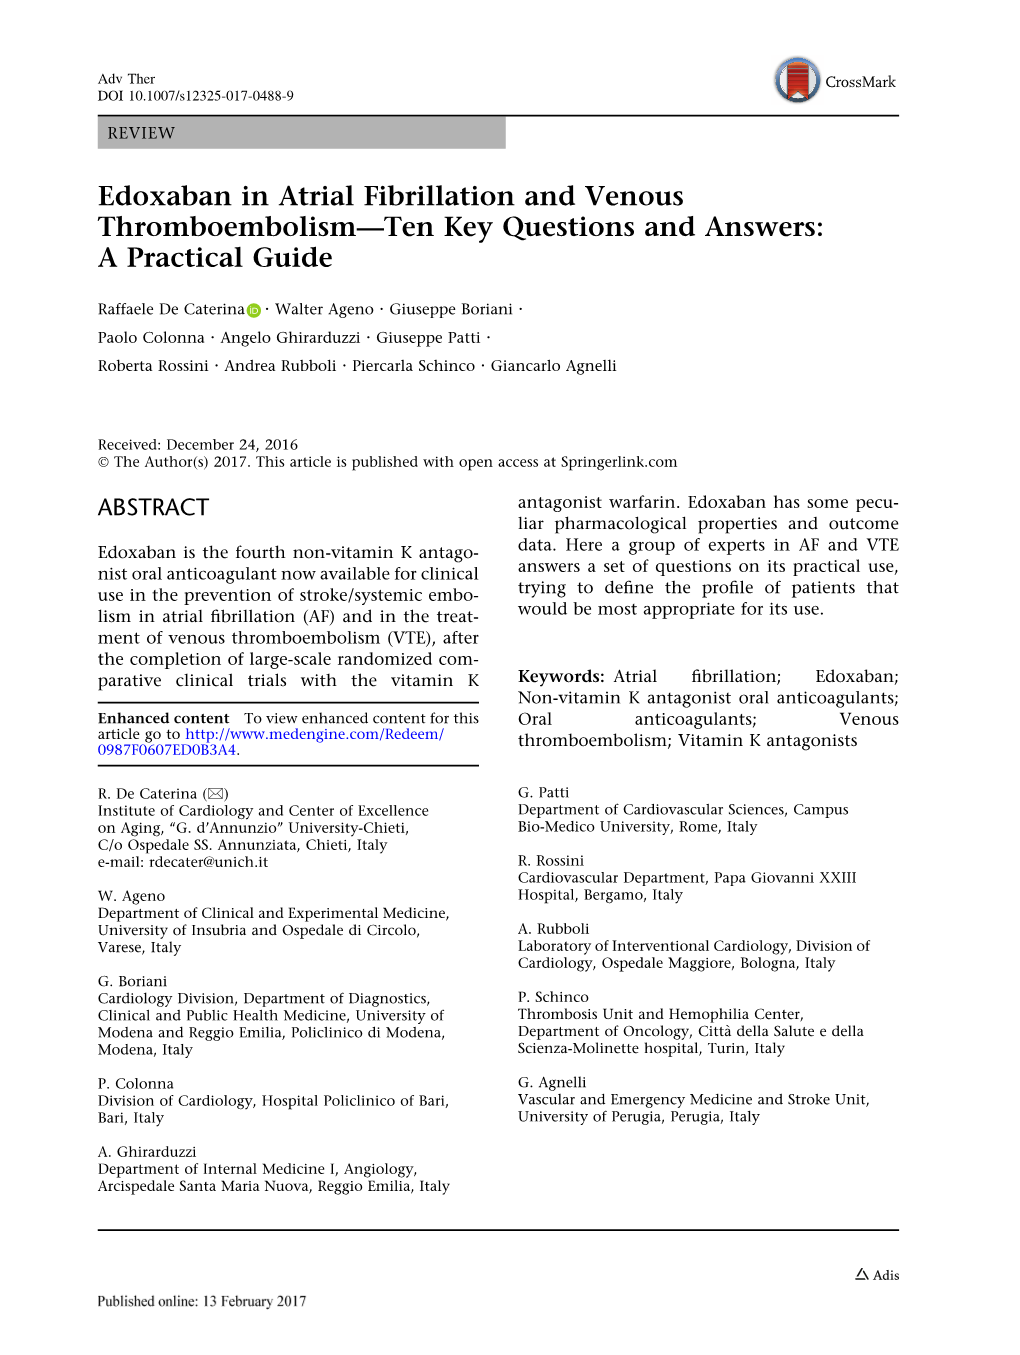 Edoxaban in Atrial Fibrillation and Venous Thromboembolism—Ten Key Questions and Answers: a Practical Guide